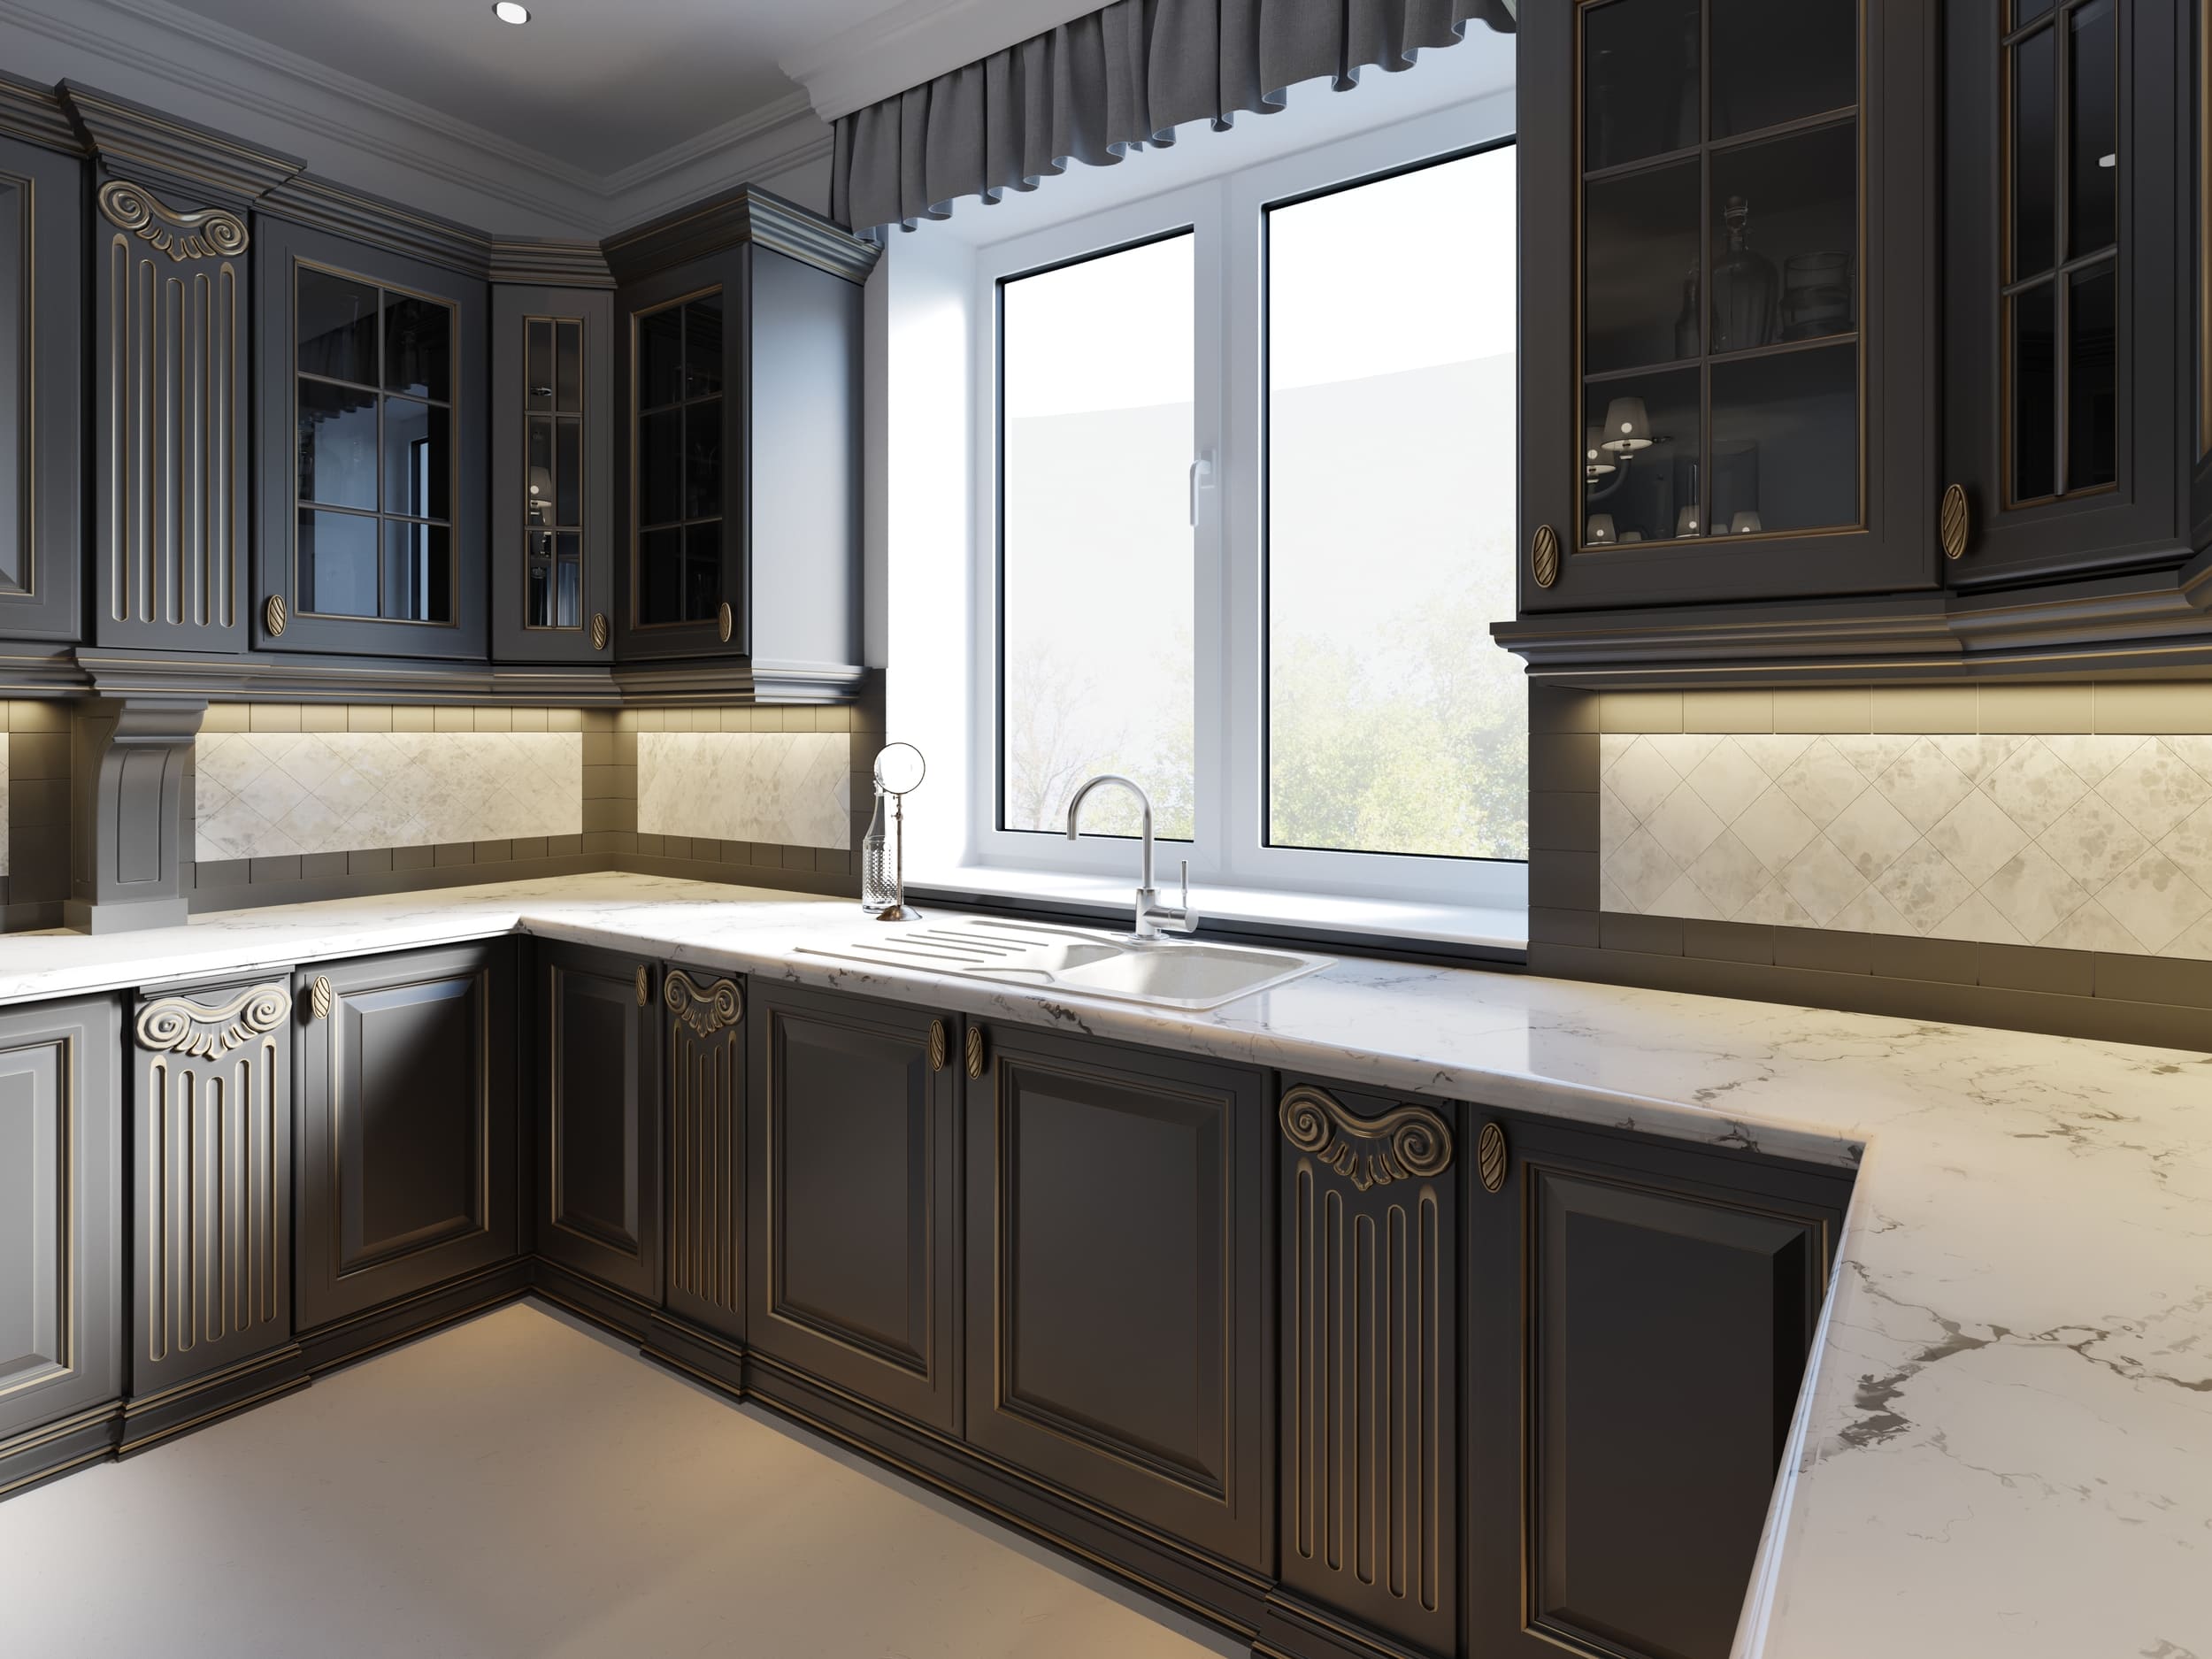 luxury-vintage-kitchen-interior-with-dining-area-3d-rendering